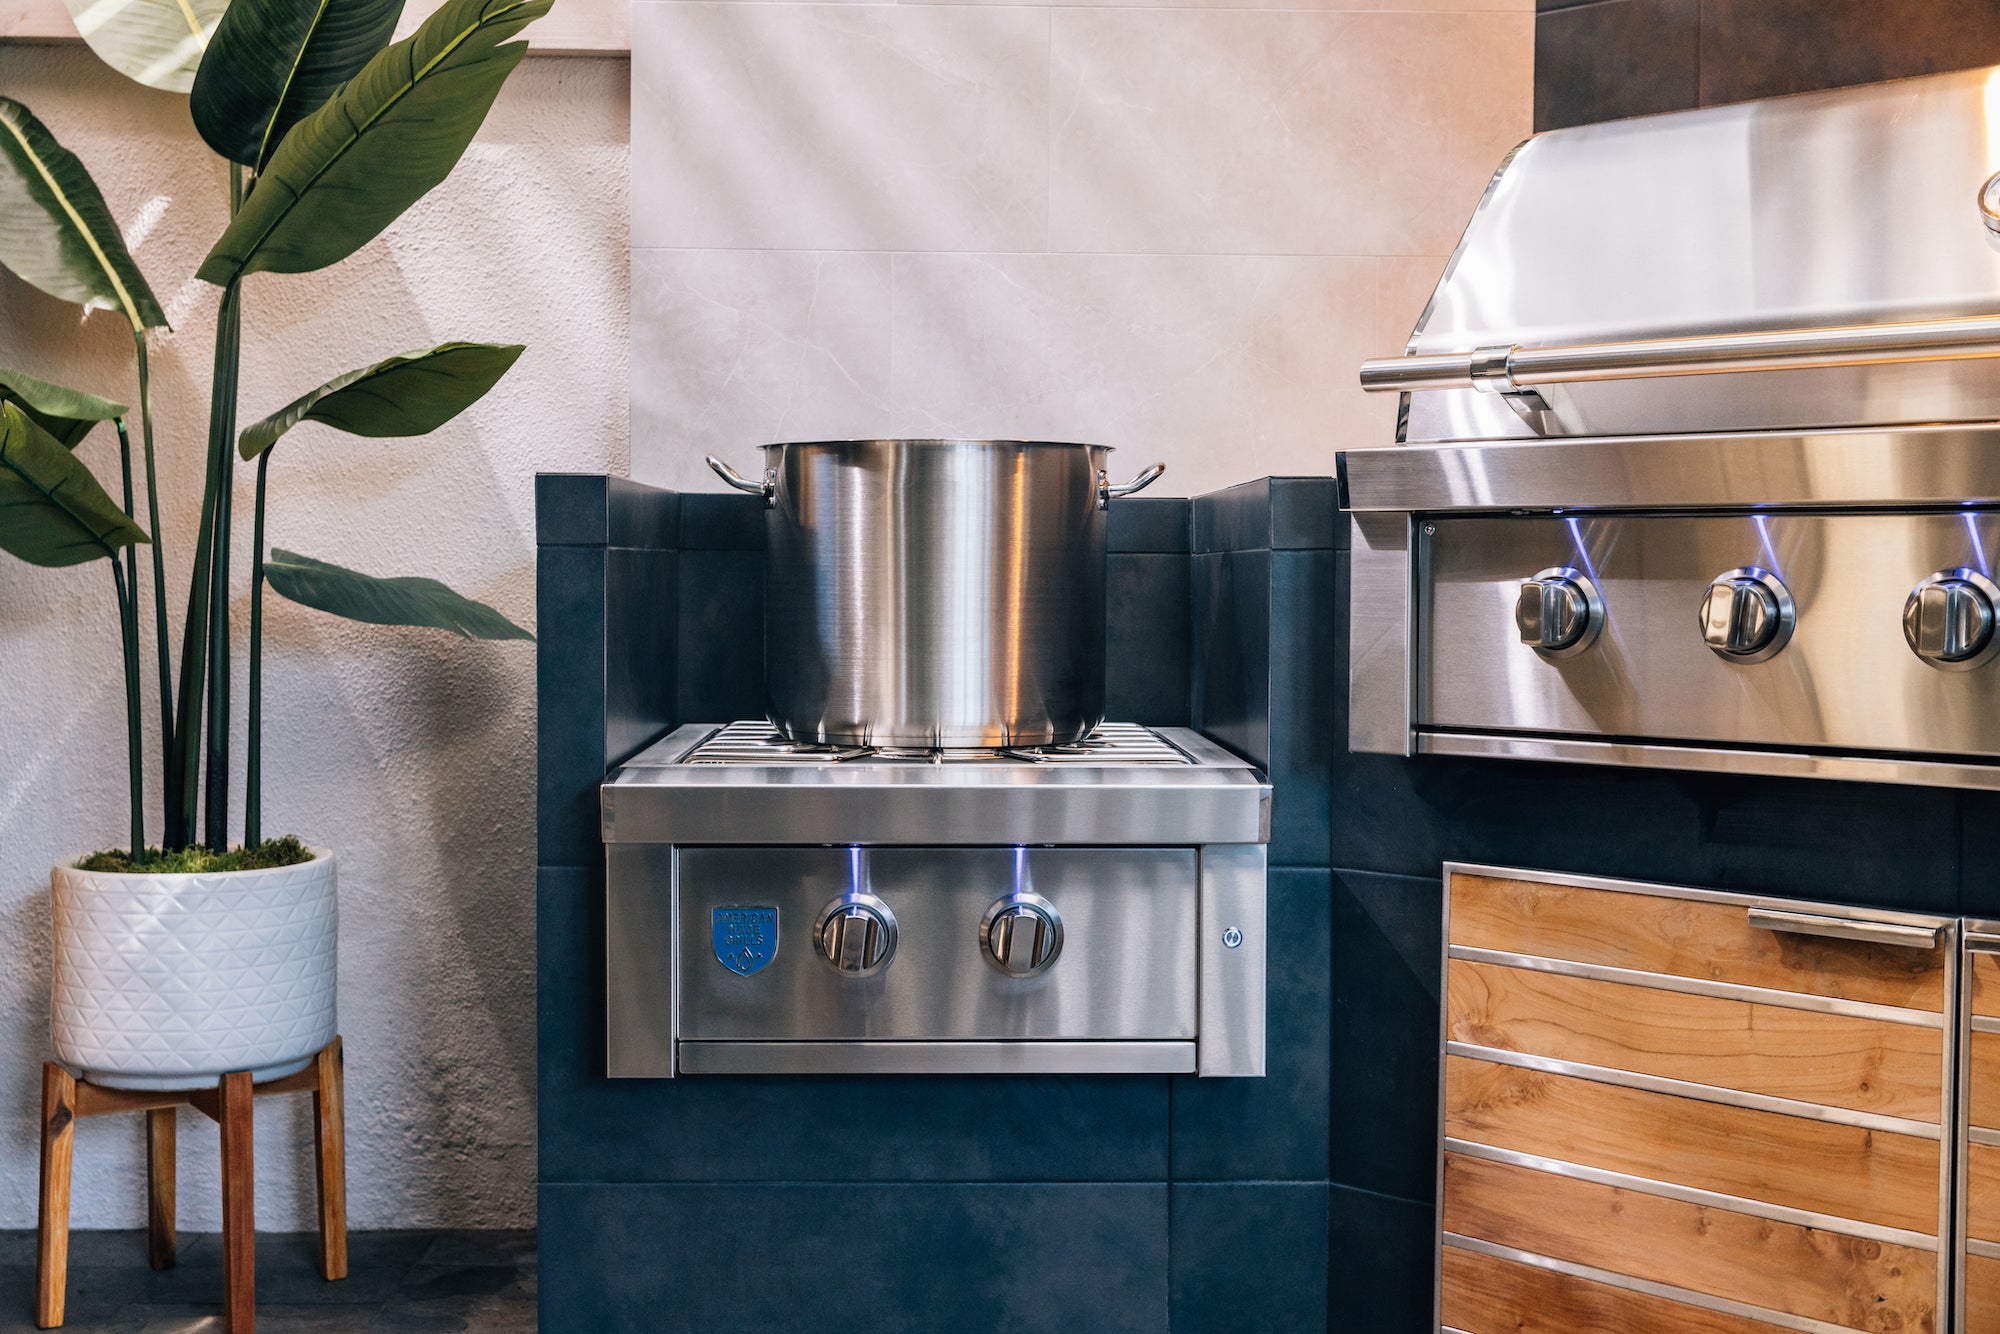 The Benefits of a Power Burner for Your Outdoor Kitchen